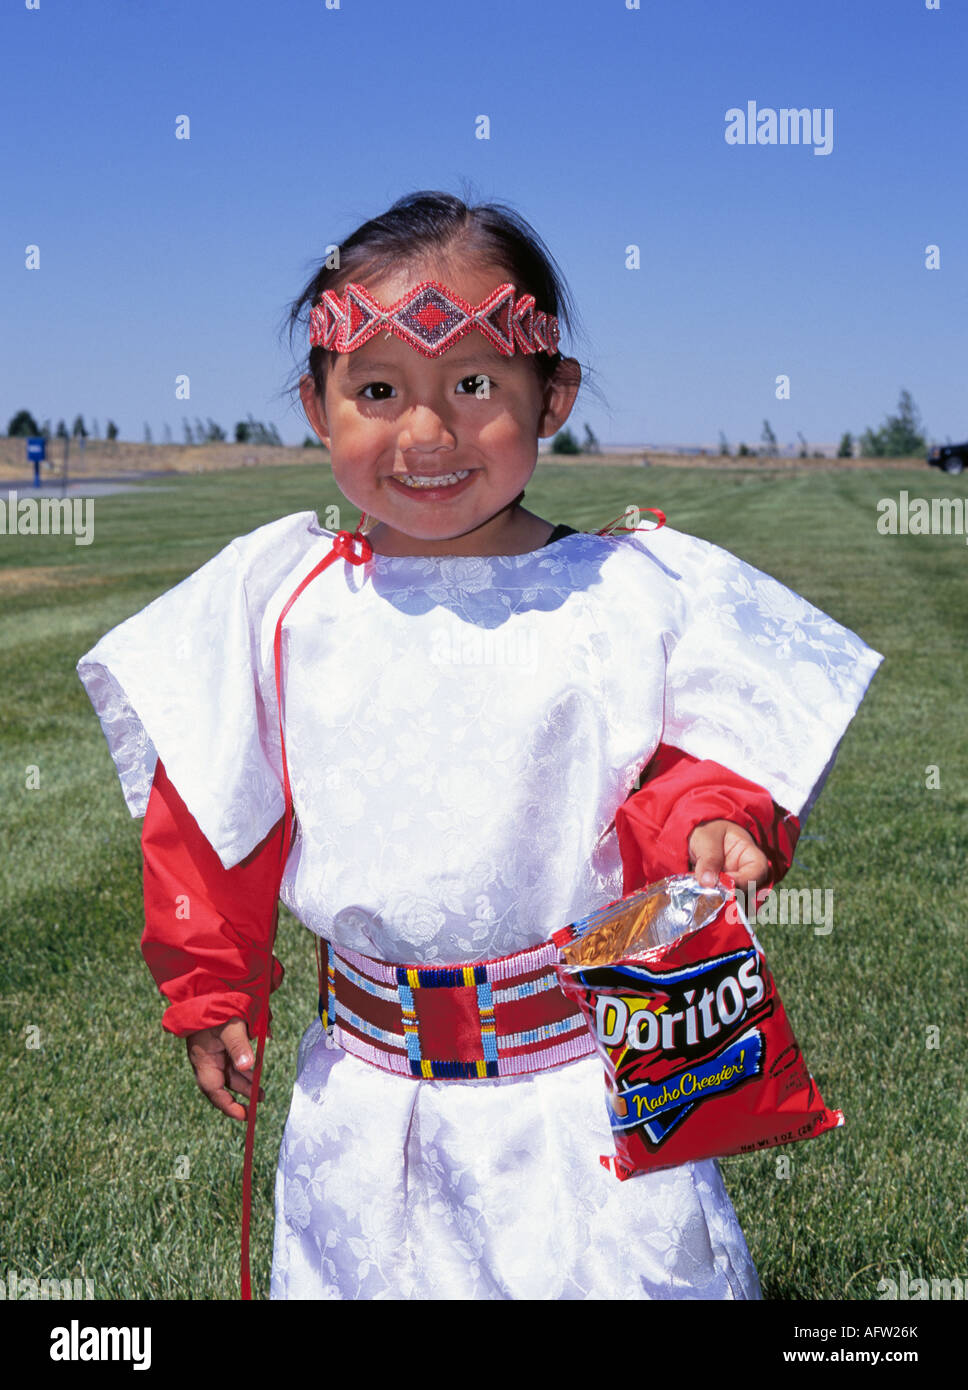 Portrait of a young Indian boy native american with a bag of Dortios tortilla chips, Pendleton, Oregon. Stock Photo